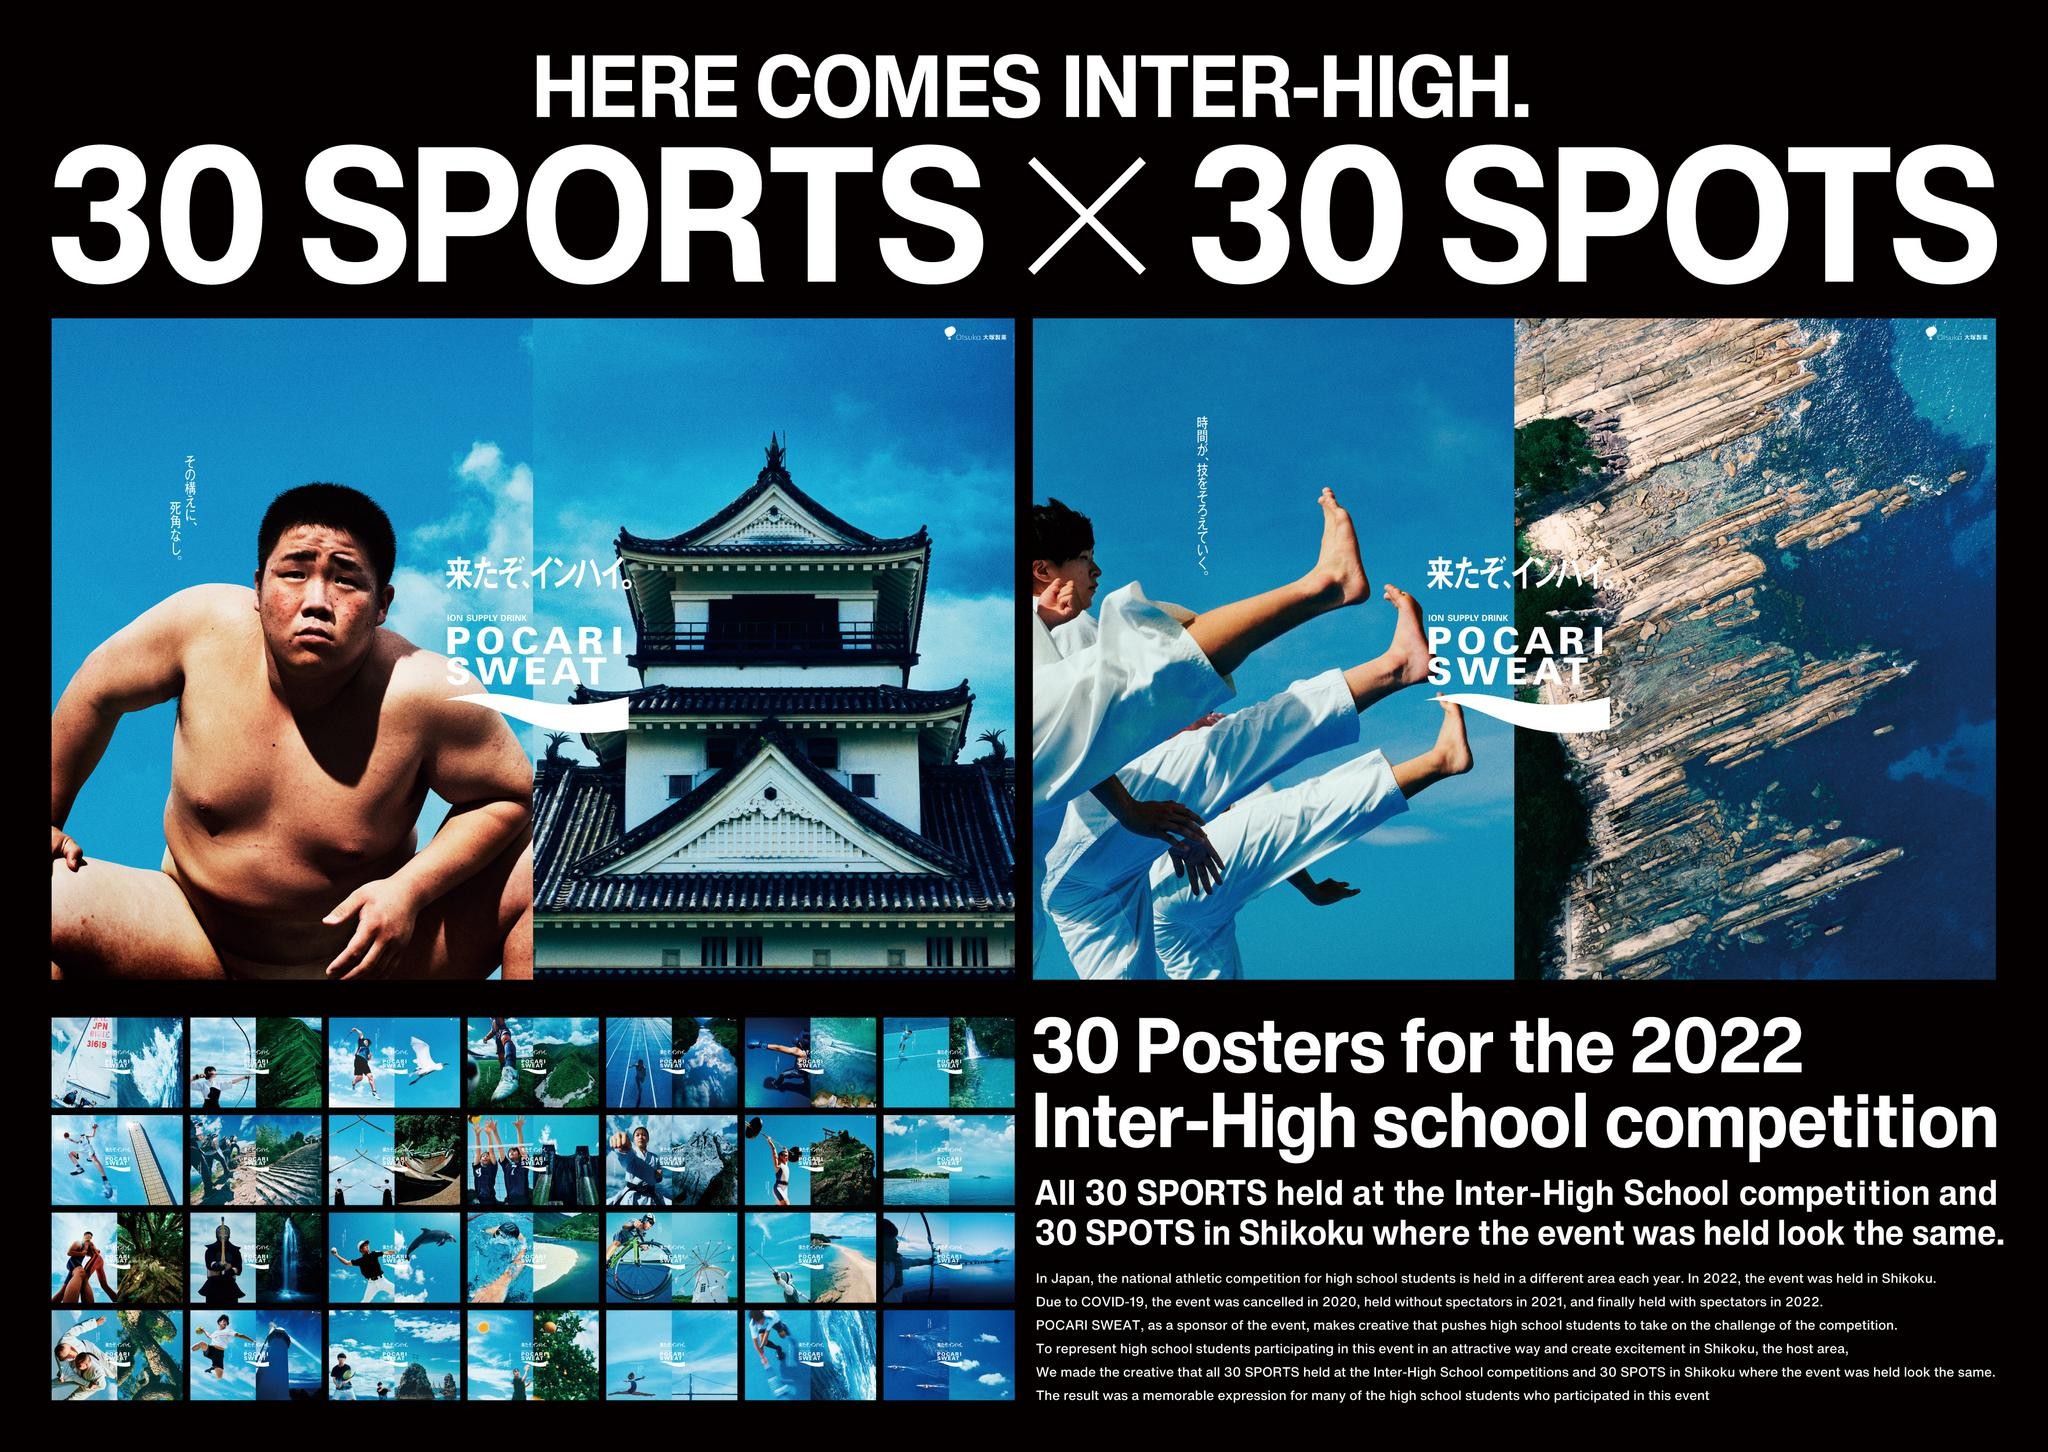 Here comes Inter-High. 30SPORTS × 30SPOTS 